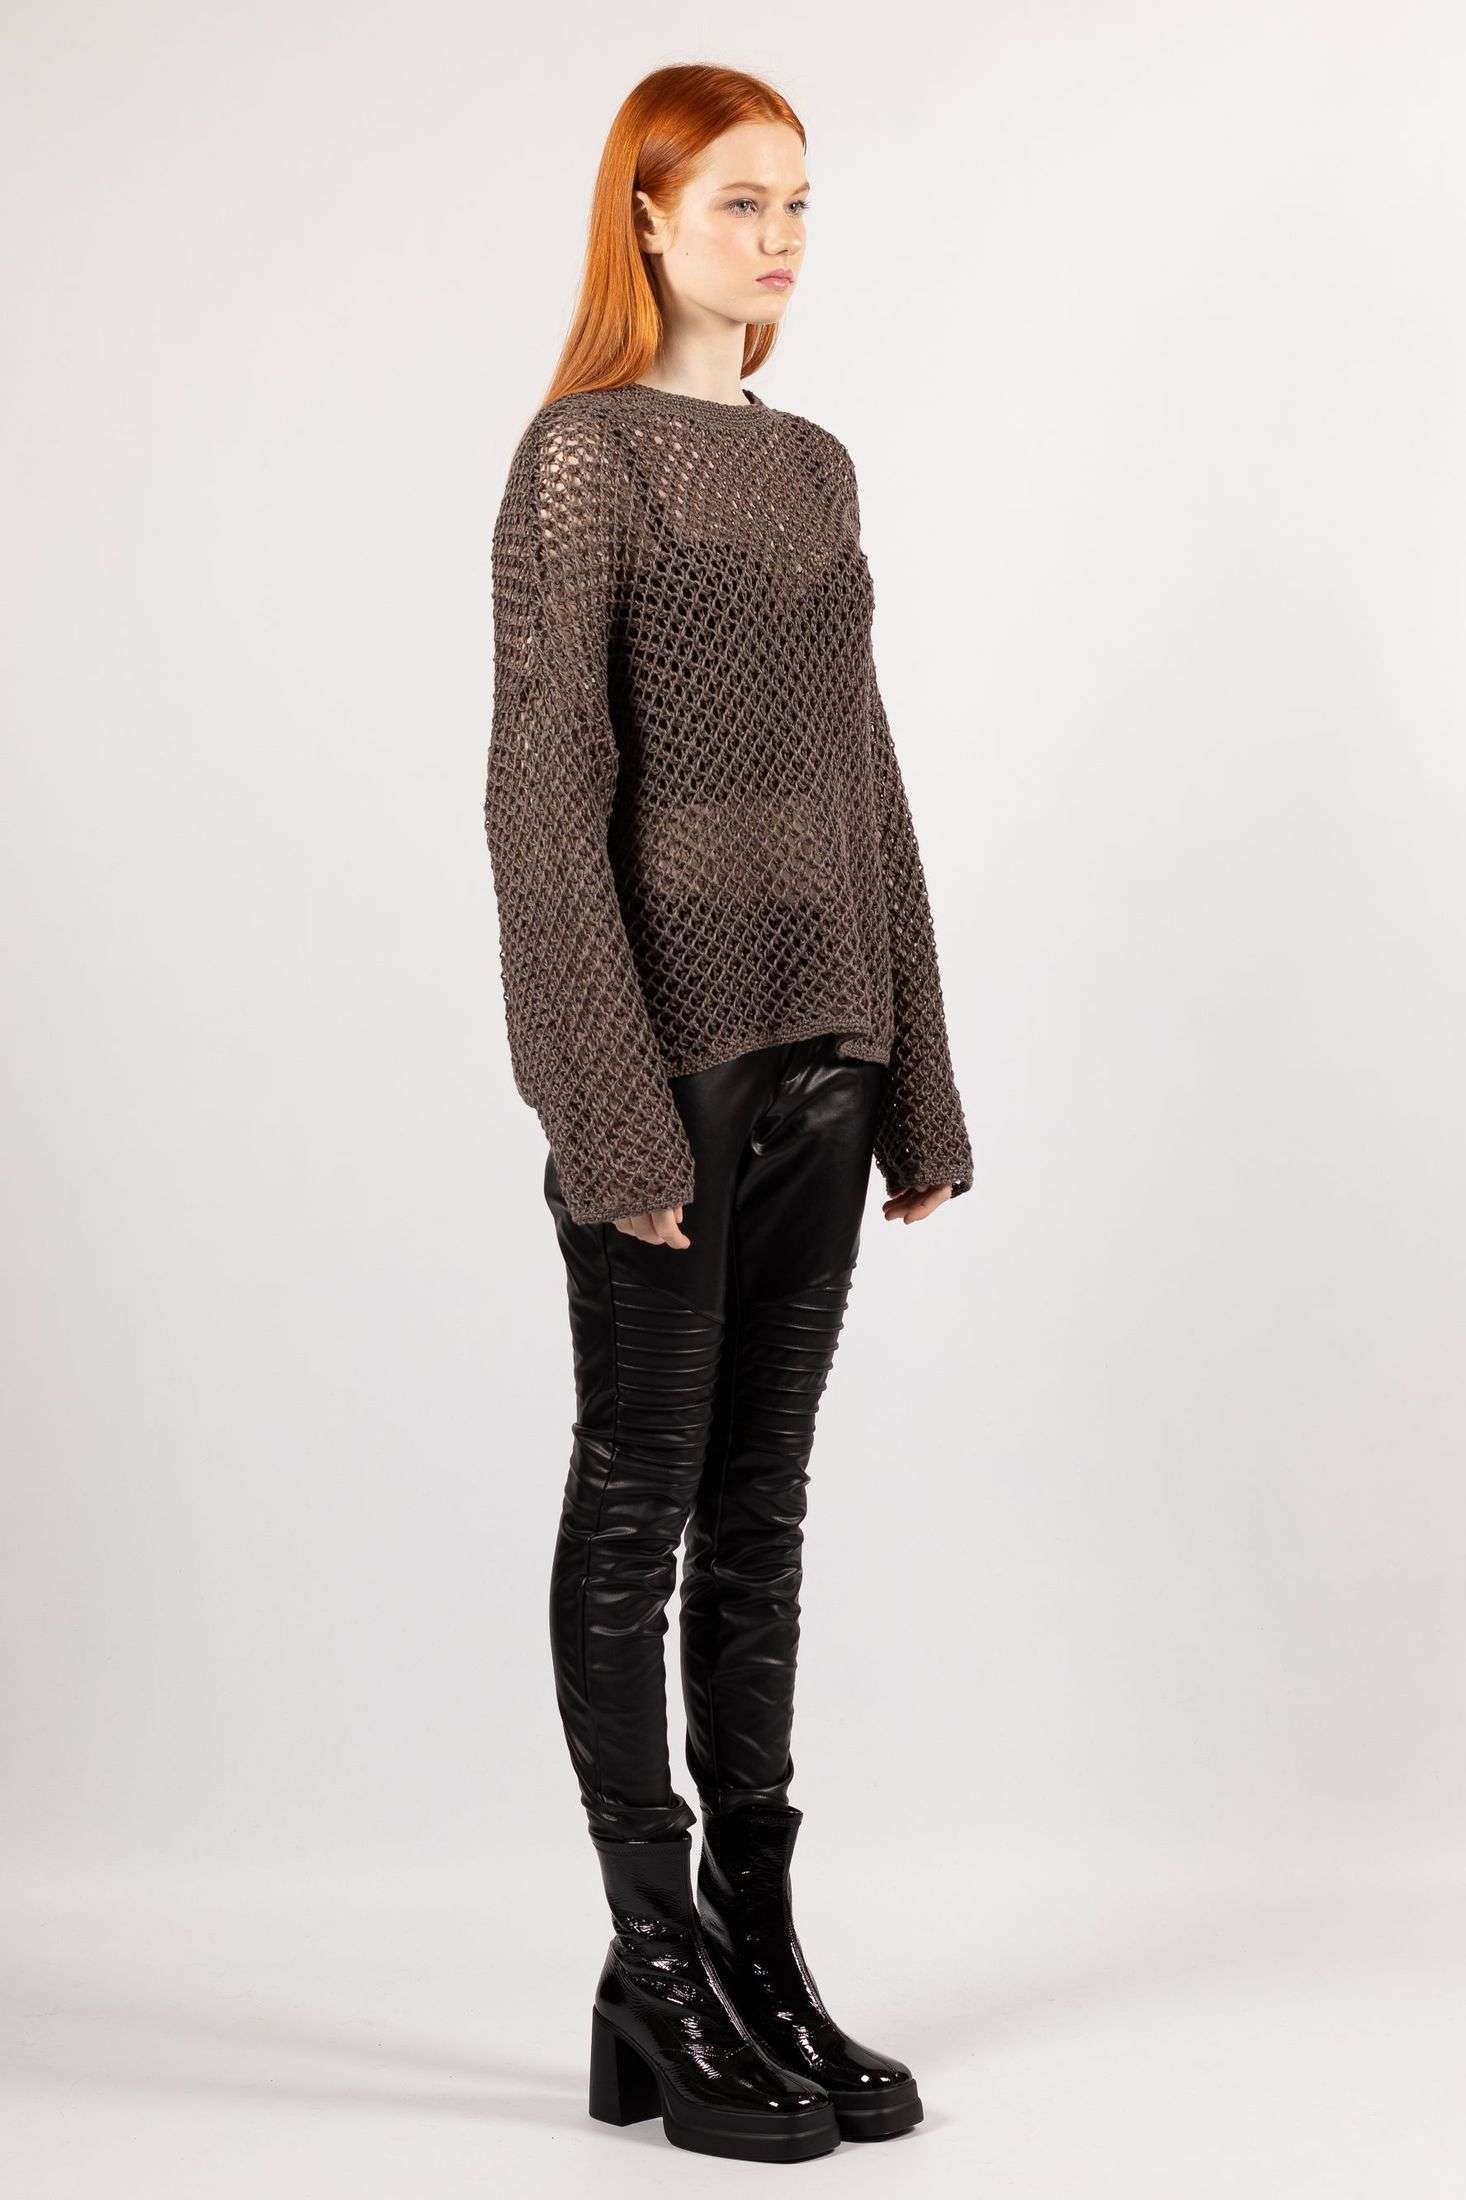 Cozy brown linen sweater with a delicate mesh pattern for a stylish and comfortable look.